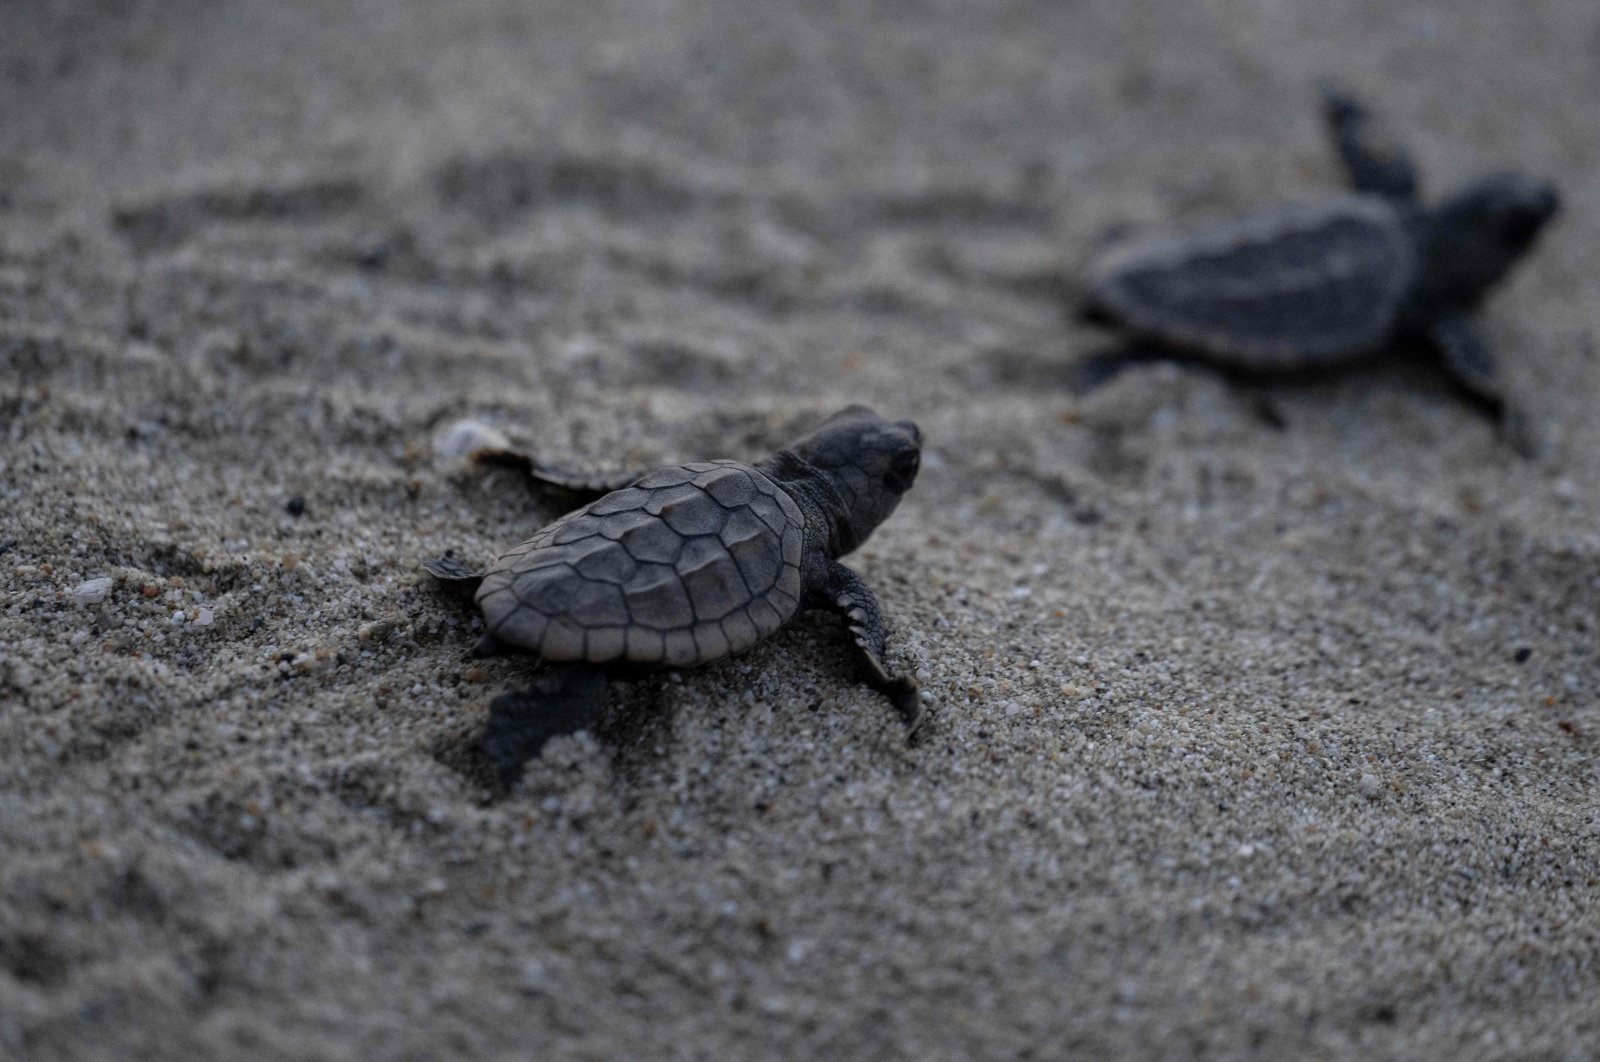 Turtle hatchlings of the endangered loggerhead species head to the ocean after being released by conservationists on El Puerto beach, in La Sabana, La Guaira State, Venezuela, July 29, 2022. (AFP Photo)